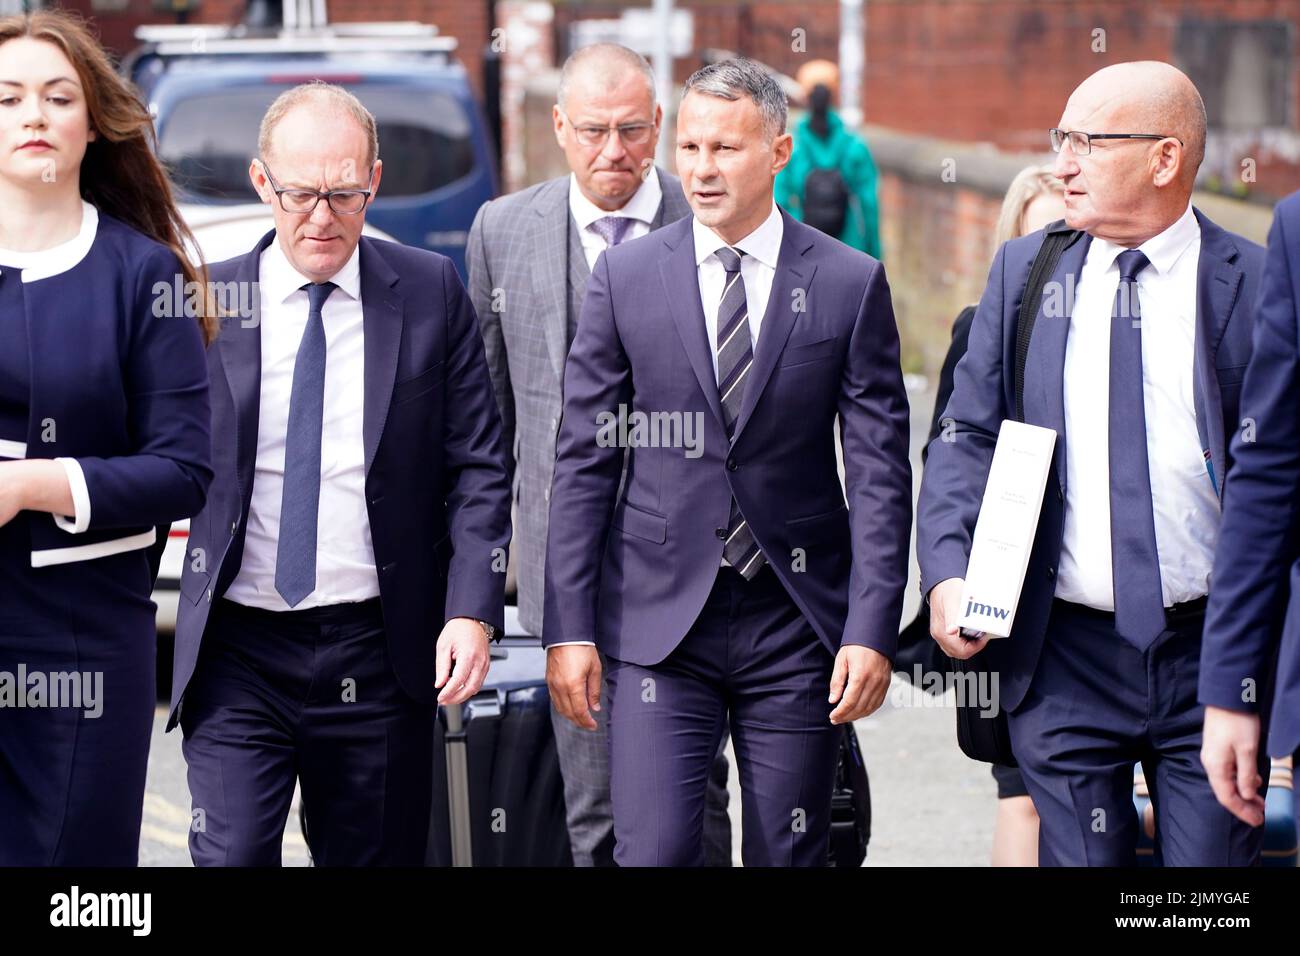 Former Manchester United footballer Ryan Giggs (centre) arriving at Manchester Minshull Street Crown Court where he is accused of controlling and coercive behaviour against ex-girlfriend Kate Greville between August 2017 and November 2020. Picture date: Monday August 8, 2022. Stock Photo